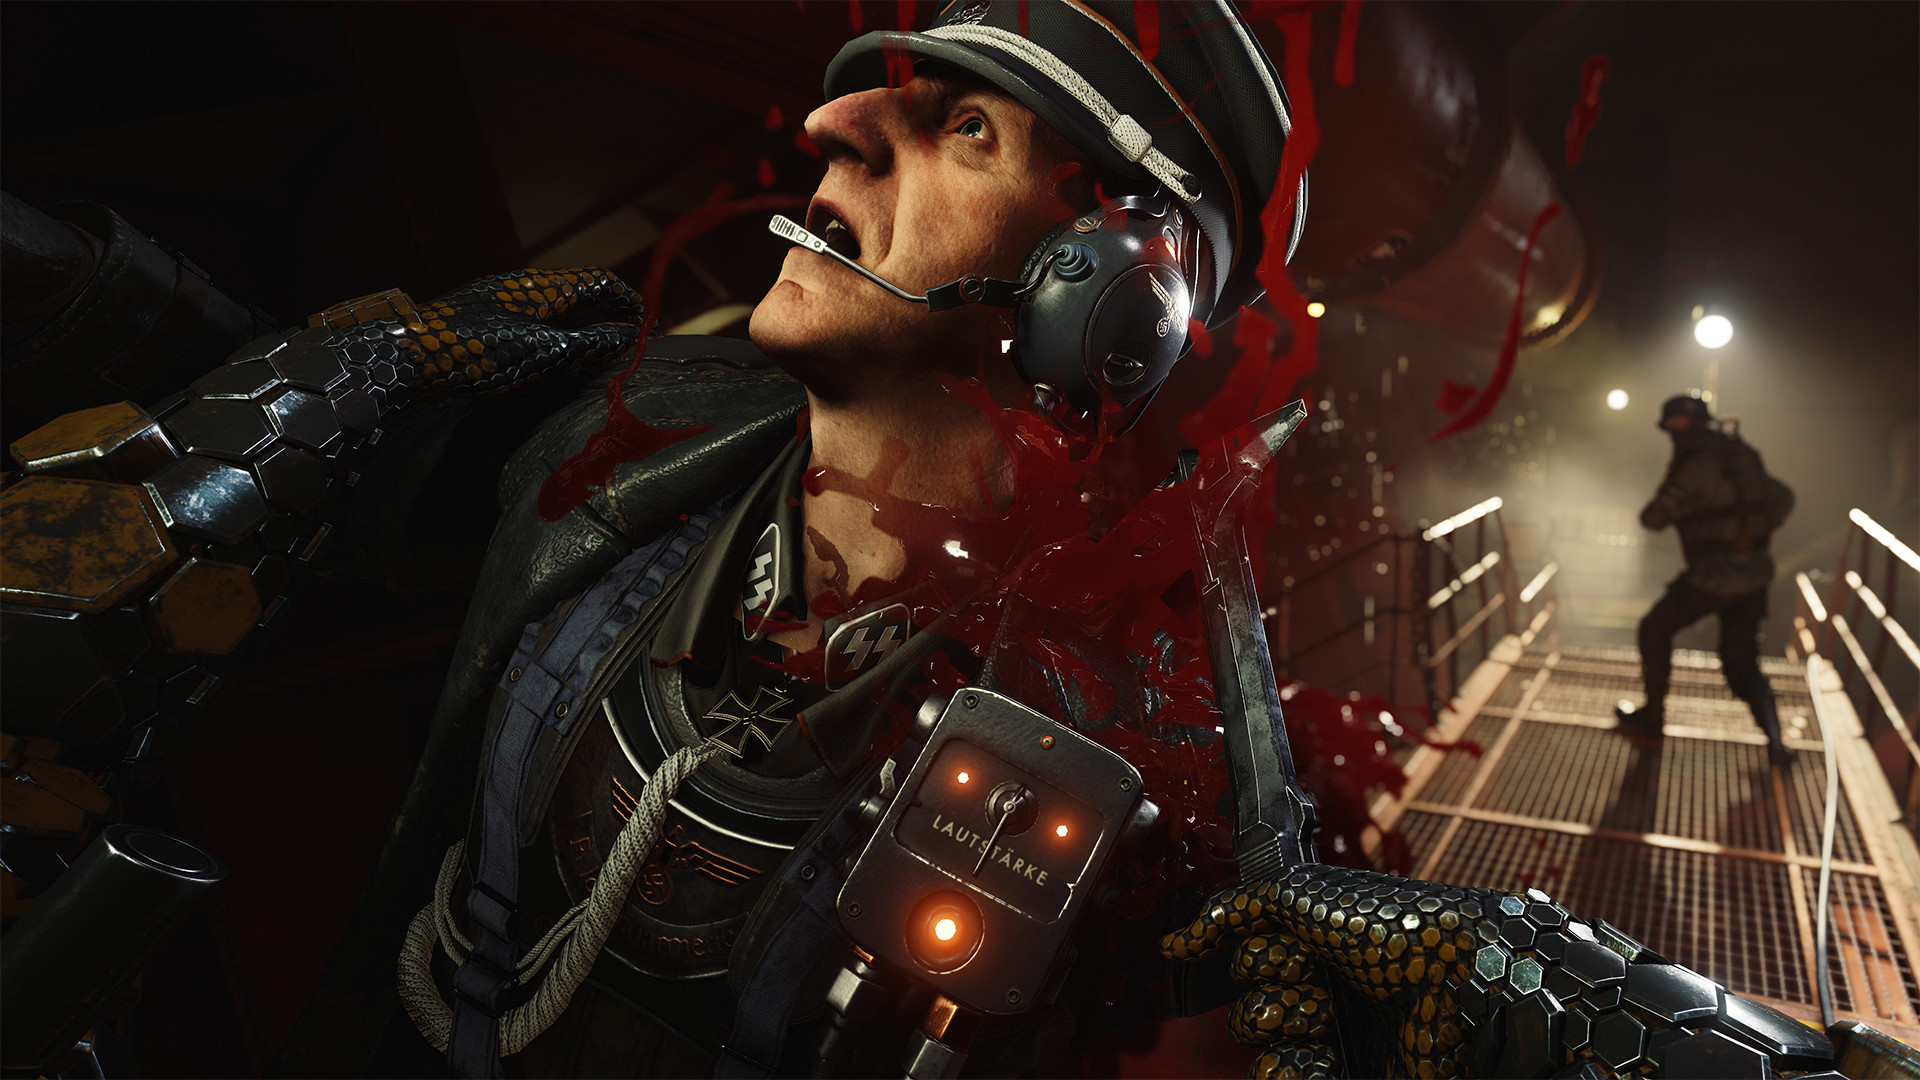 Wolfenstein 2: The New Colossus - How To Farm Enigma Codes & Max Perks -  Gameranx